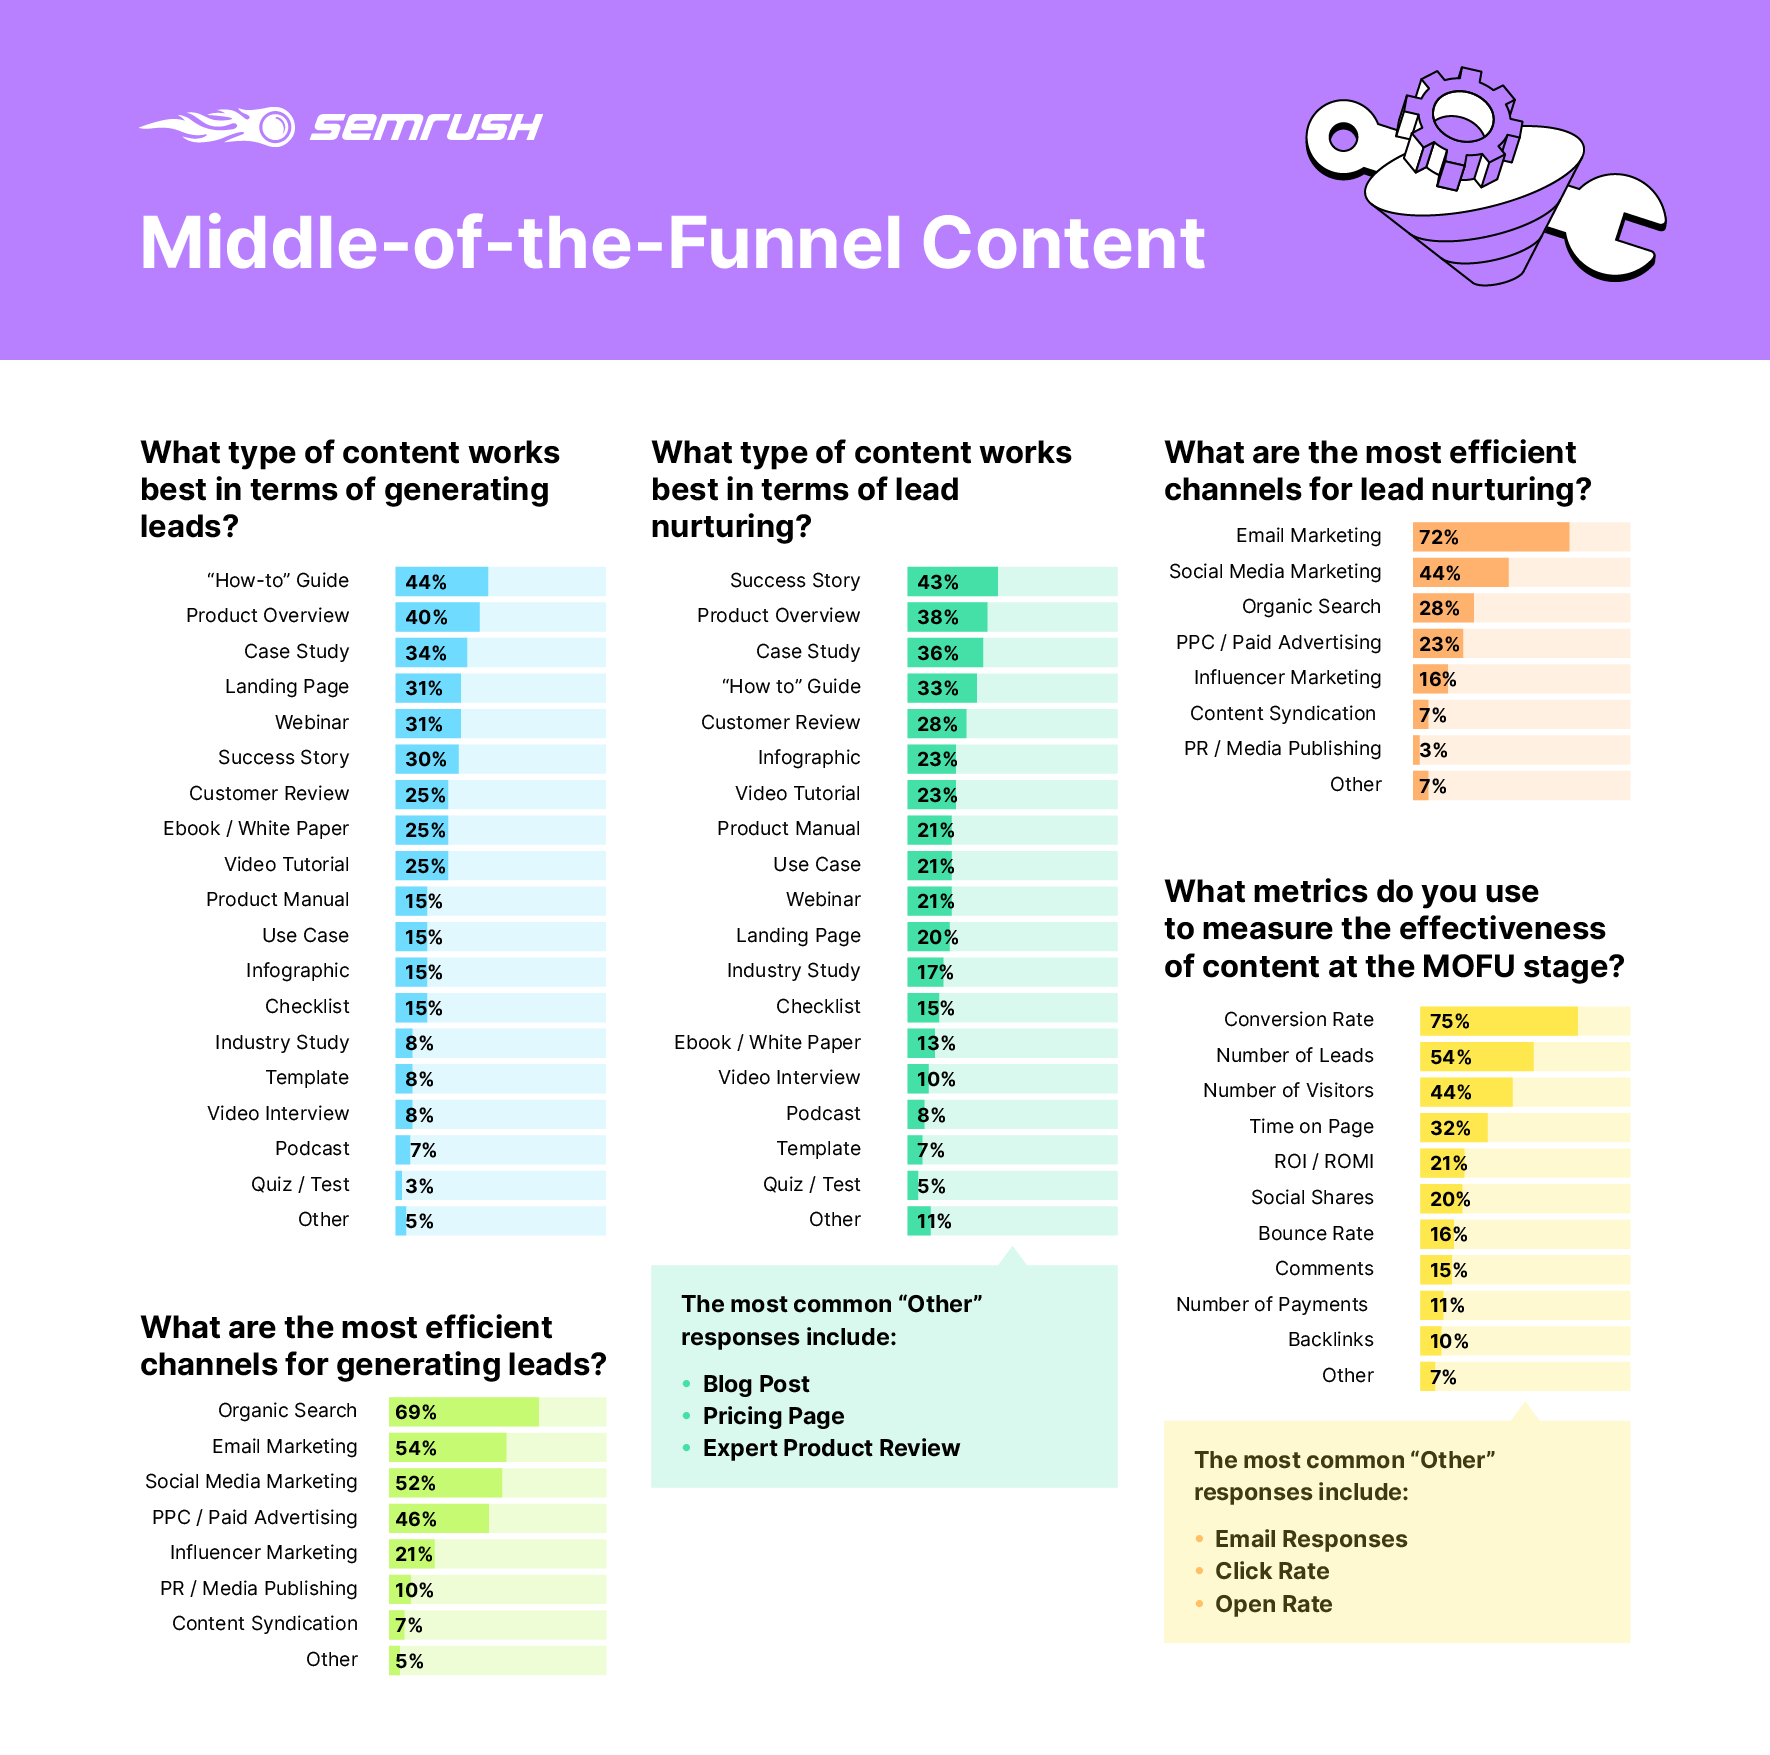 What content works best in the middle of the marketing funnel?